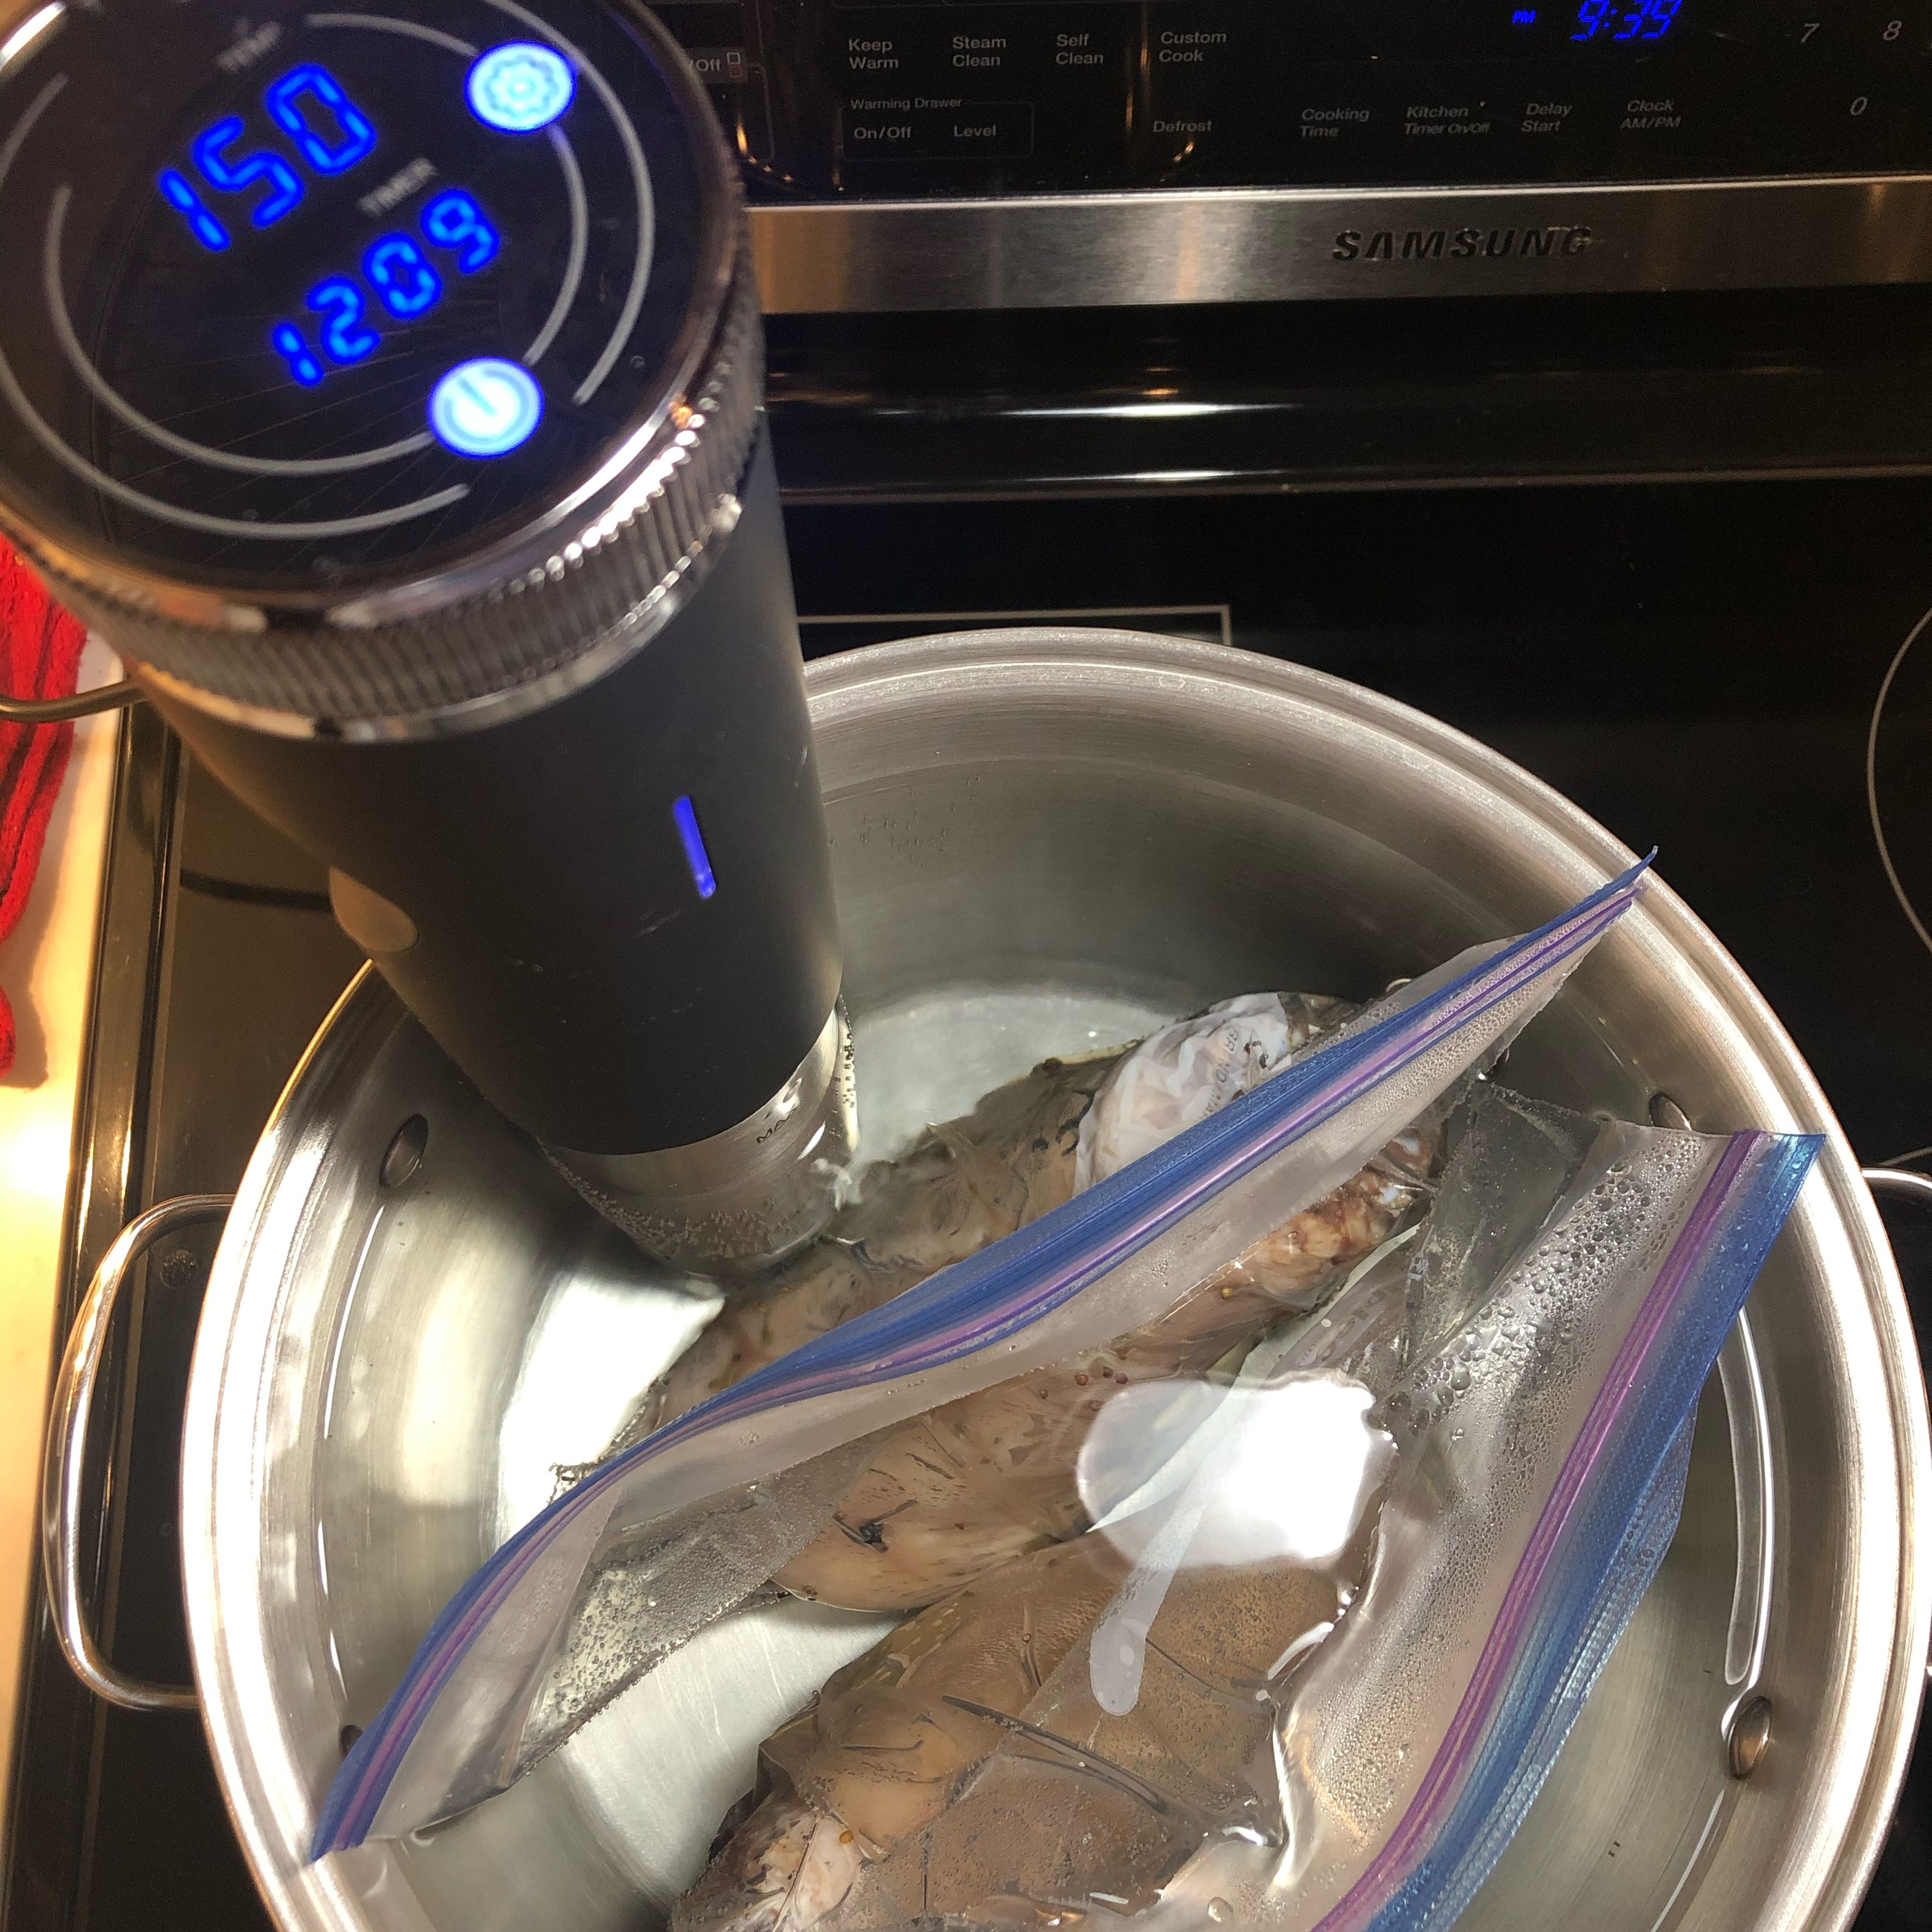 Place each bag in a deep pot filled with water. Ensure the meat is situated below the water. Turn on sous vide machine and set temperature to 150F and cooking time to 14h.